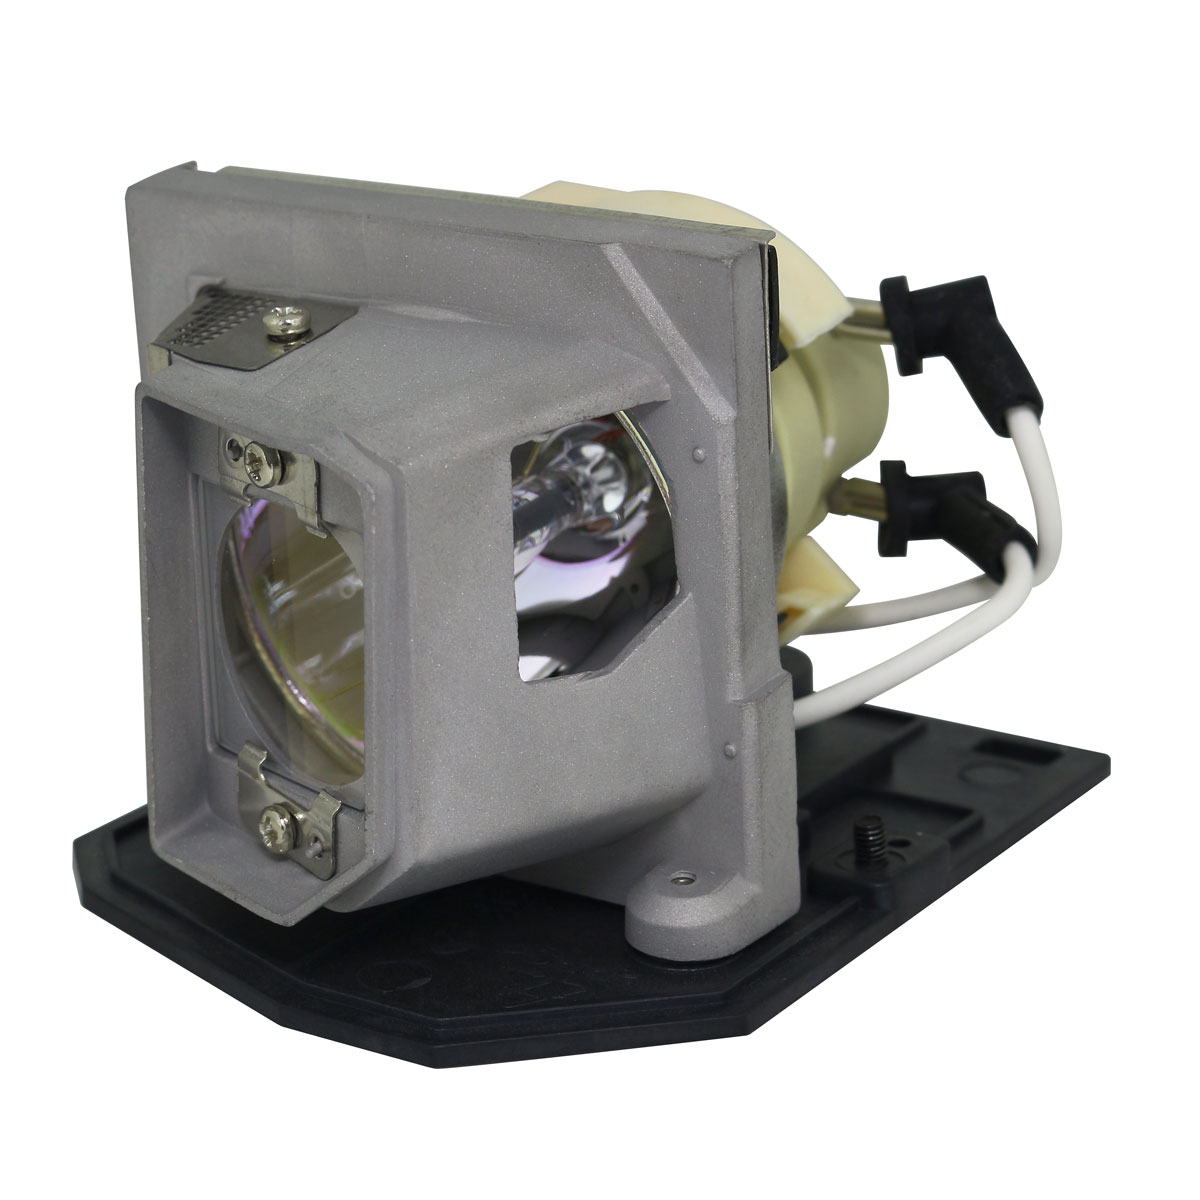 Original Osram Projector Lamp Replacement with Housing for Acer EC.K0700.001 - image 1 of 6